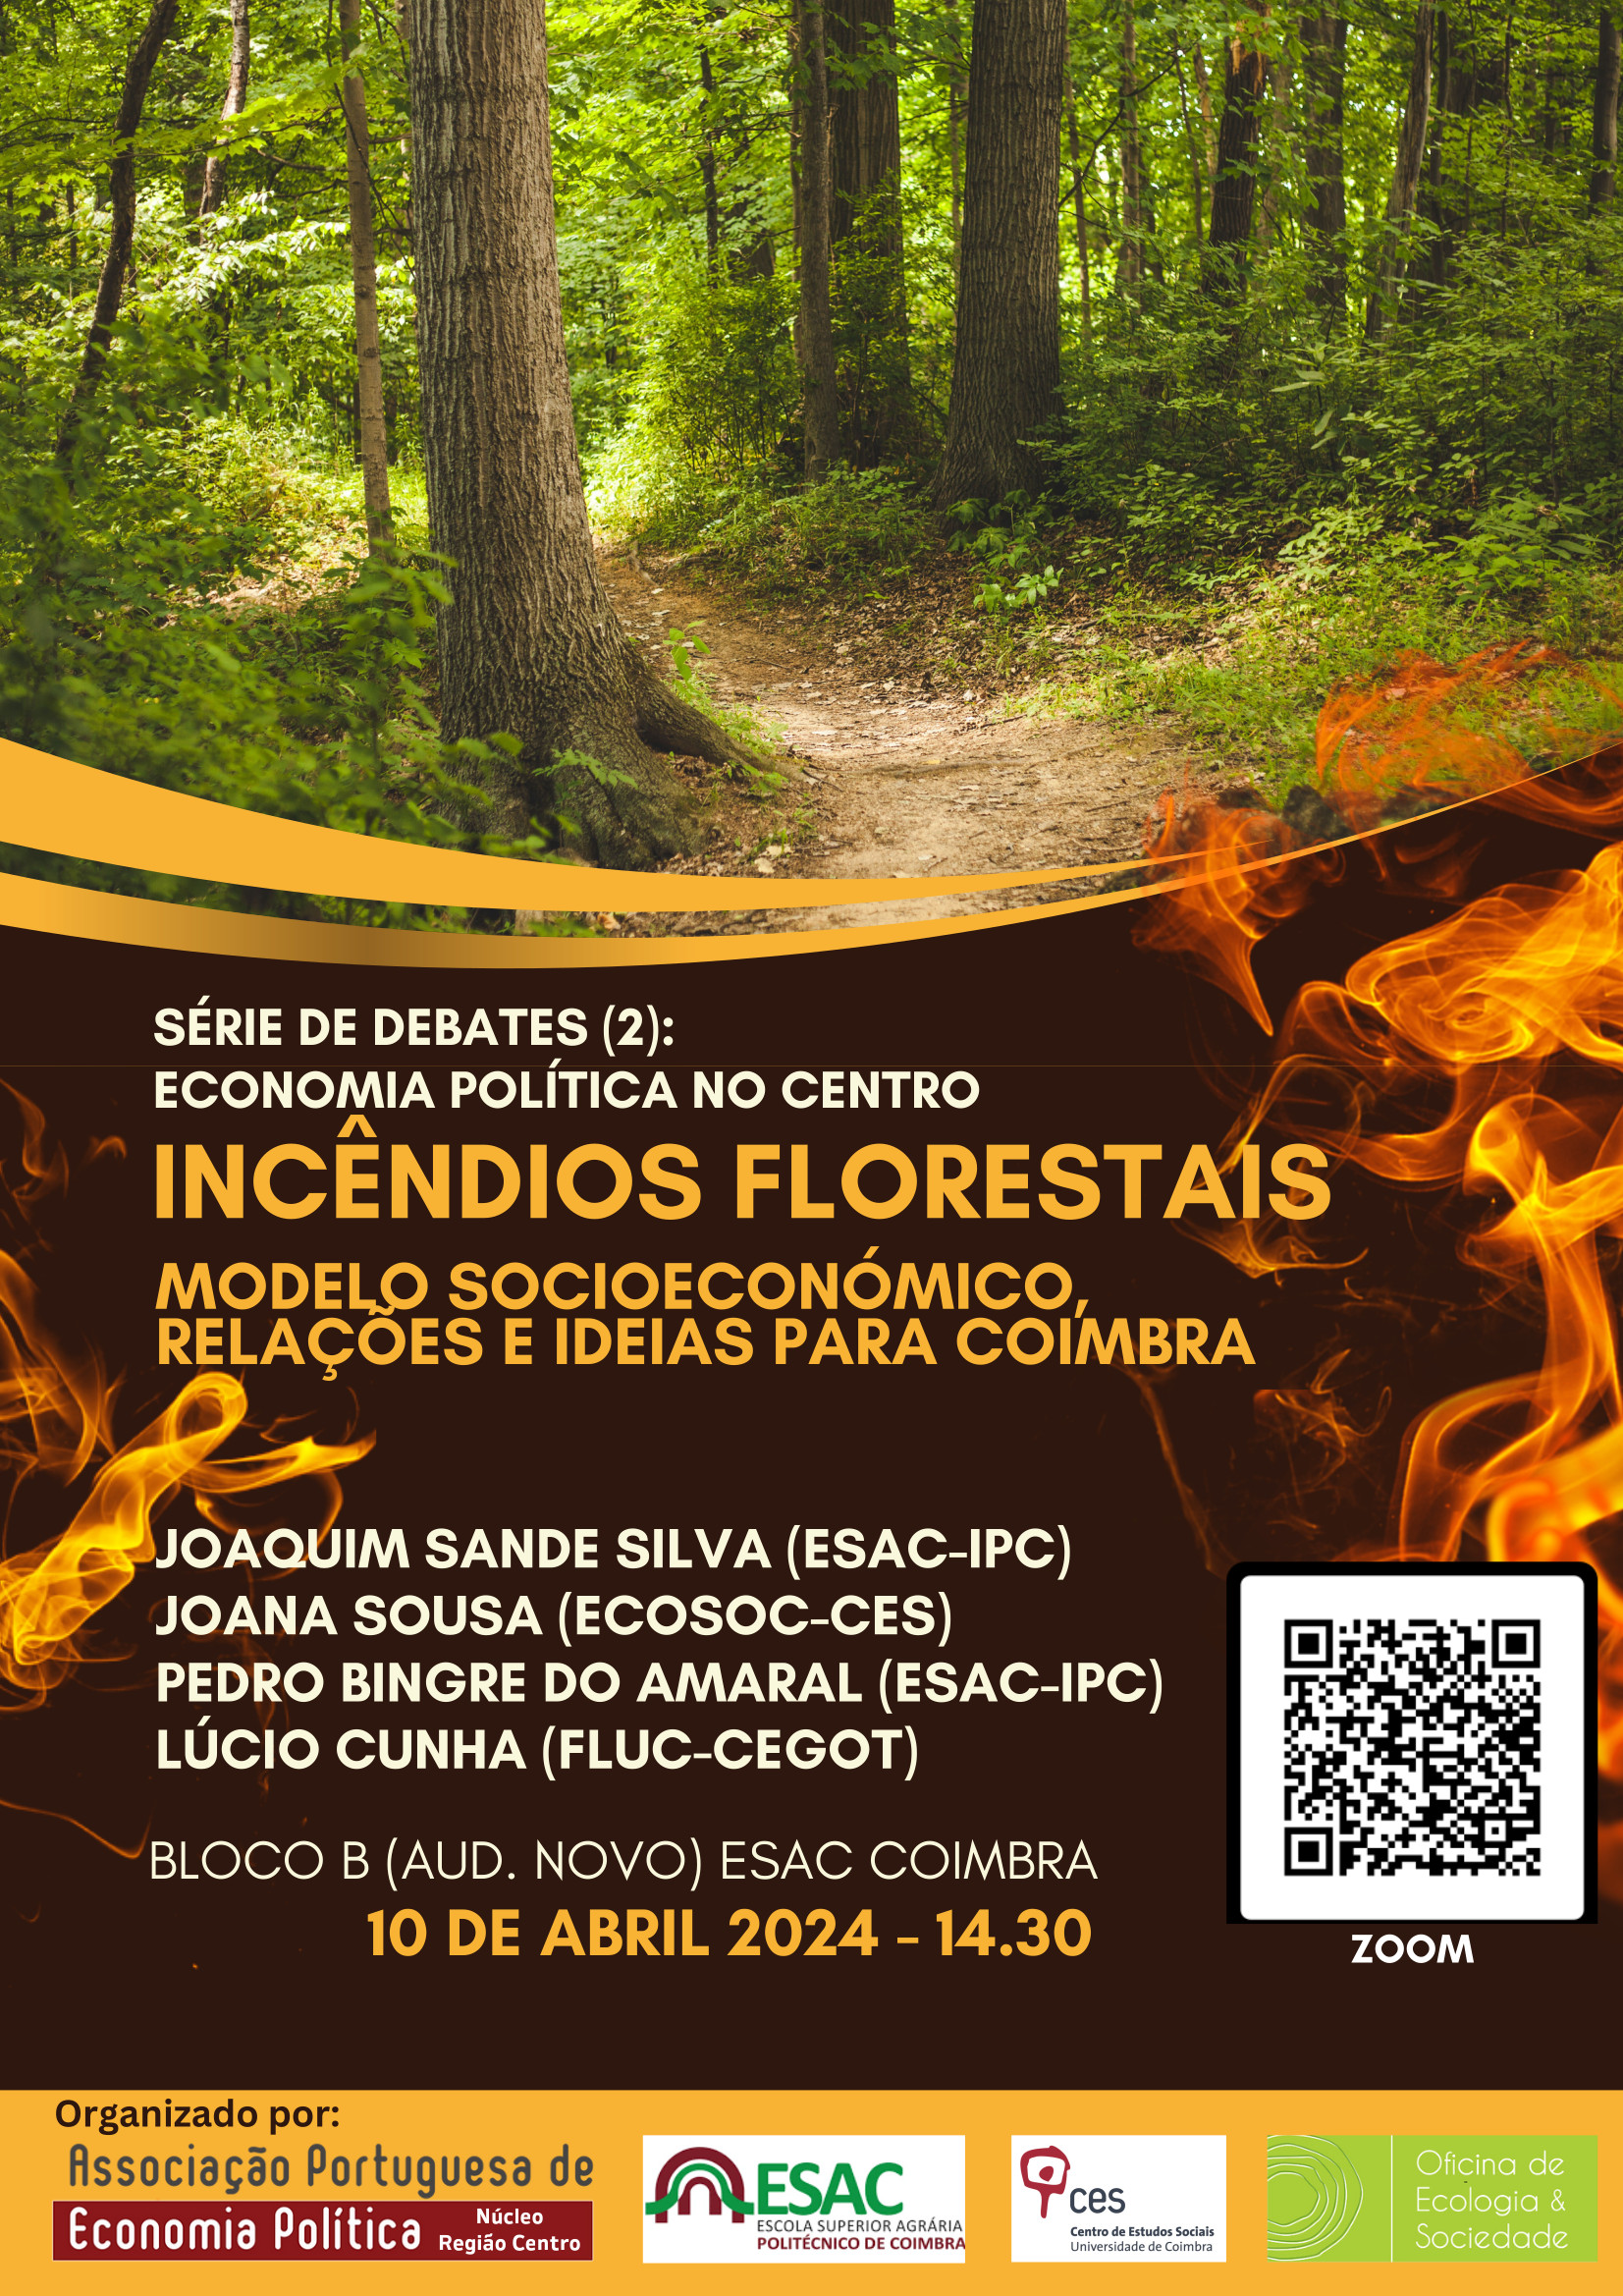 Forest fires and the socio-economic model: relationships and ideas for Coimbra <span id="edit_45555"><script>$(function() { $('#edit_45555').load( "/myces/user/editobj.php?tipo=evento&id=45555" ); });</script></span>